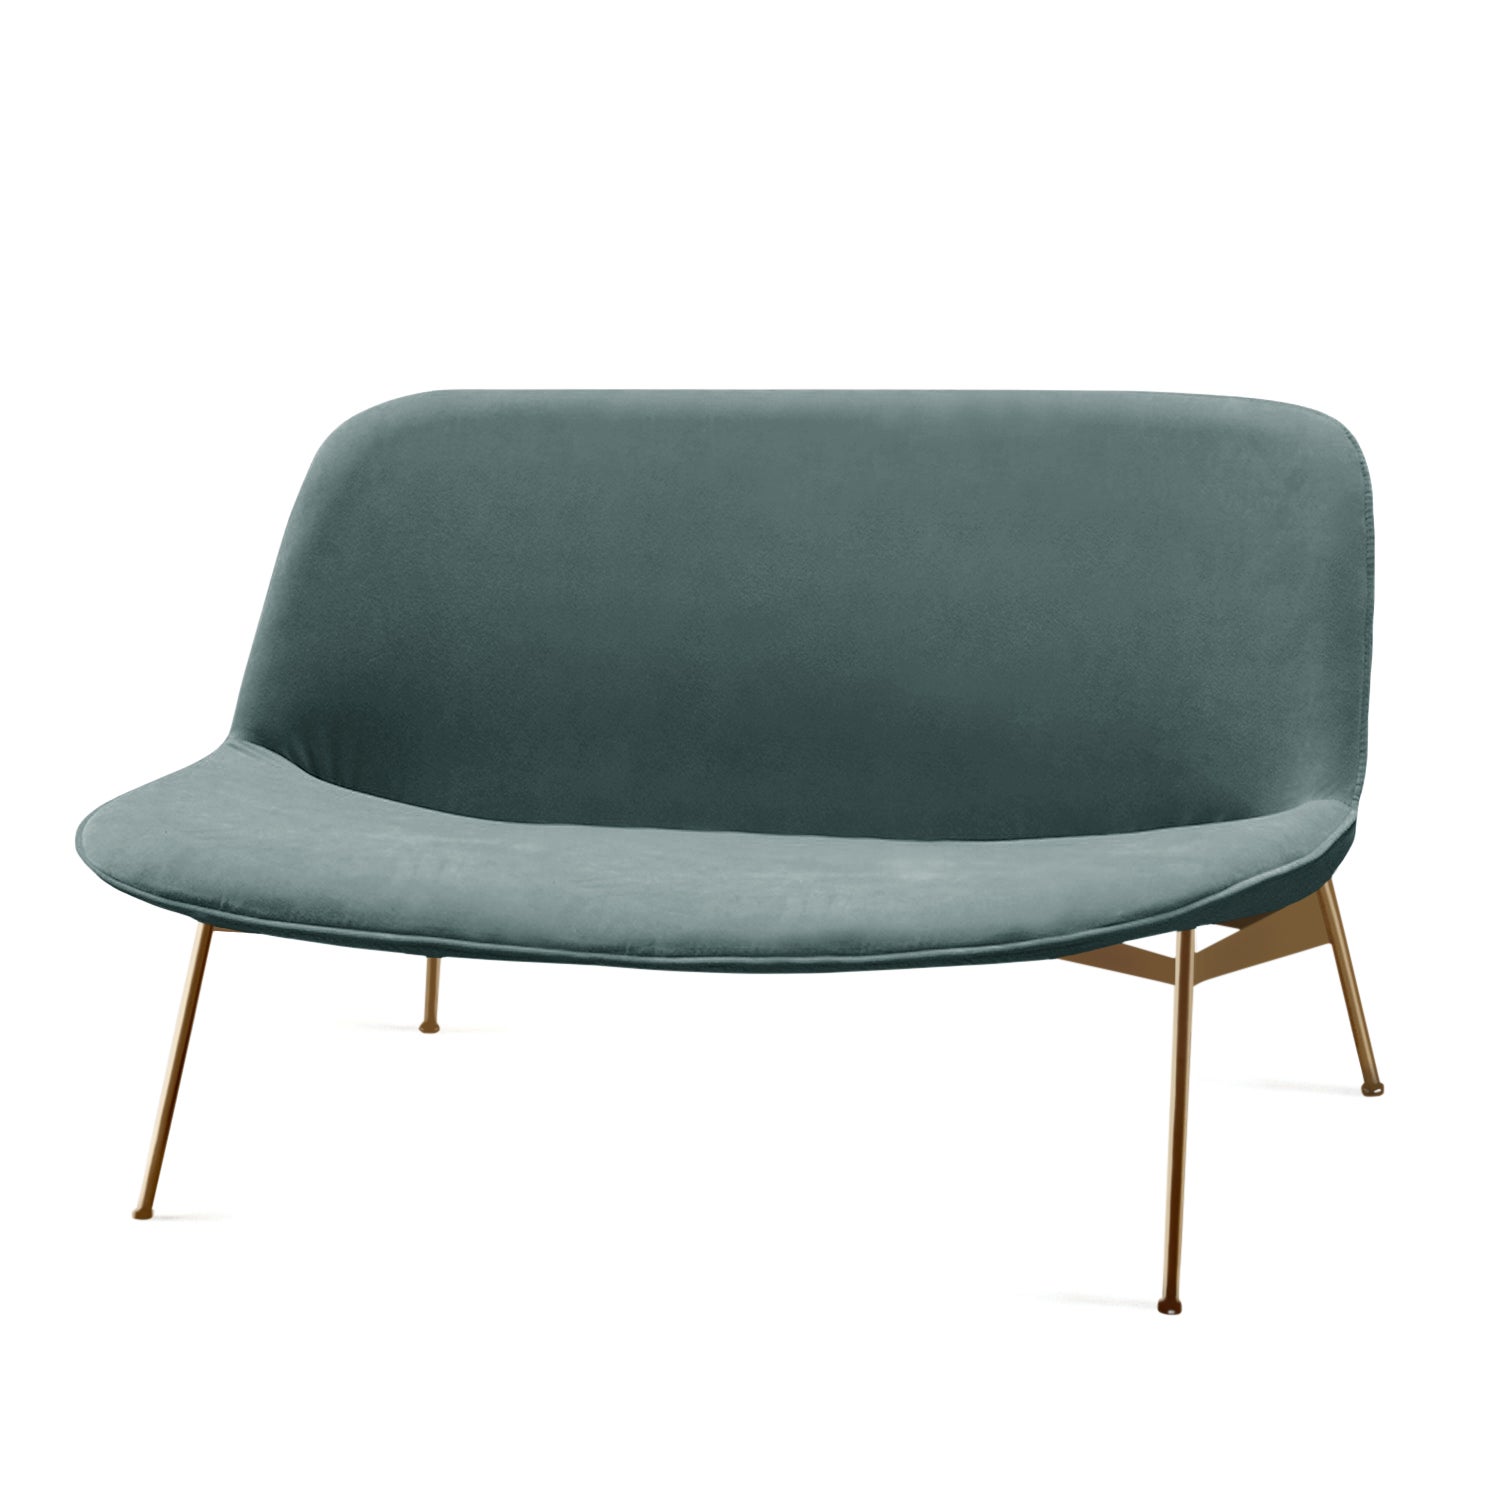 Chiado Sofa, Small with Teal and Gold